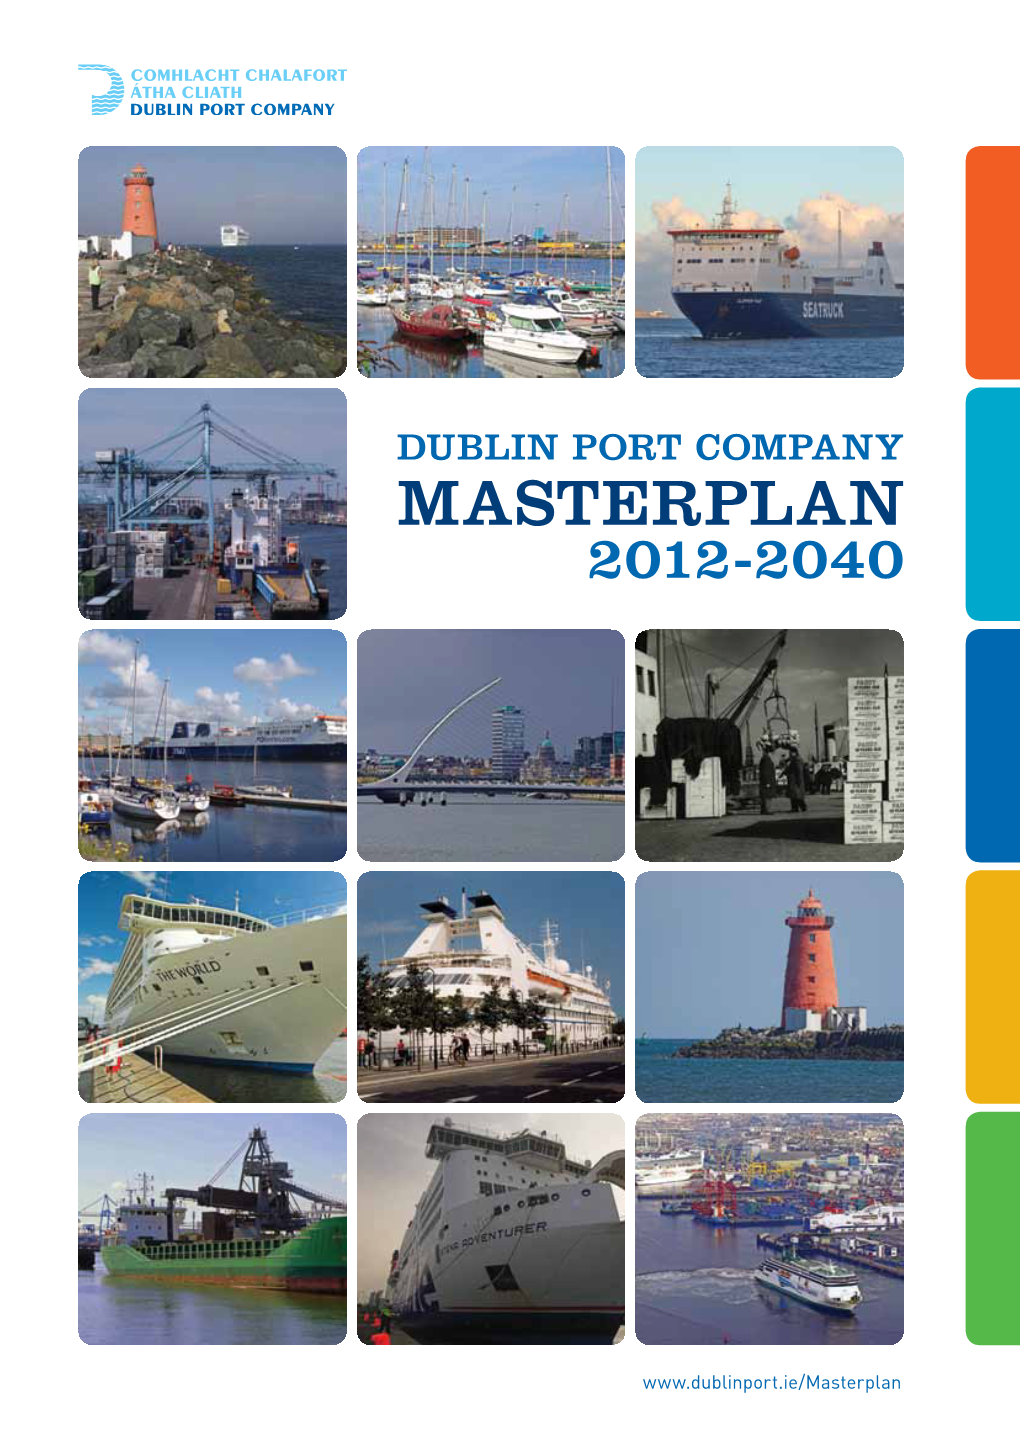 Dublin Port Masterplan Presents a Vision for Future Positive Trajectory of Growth Over the Period to 2040